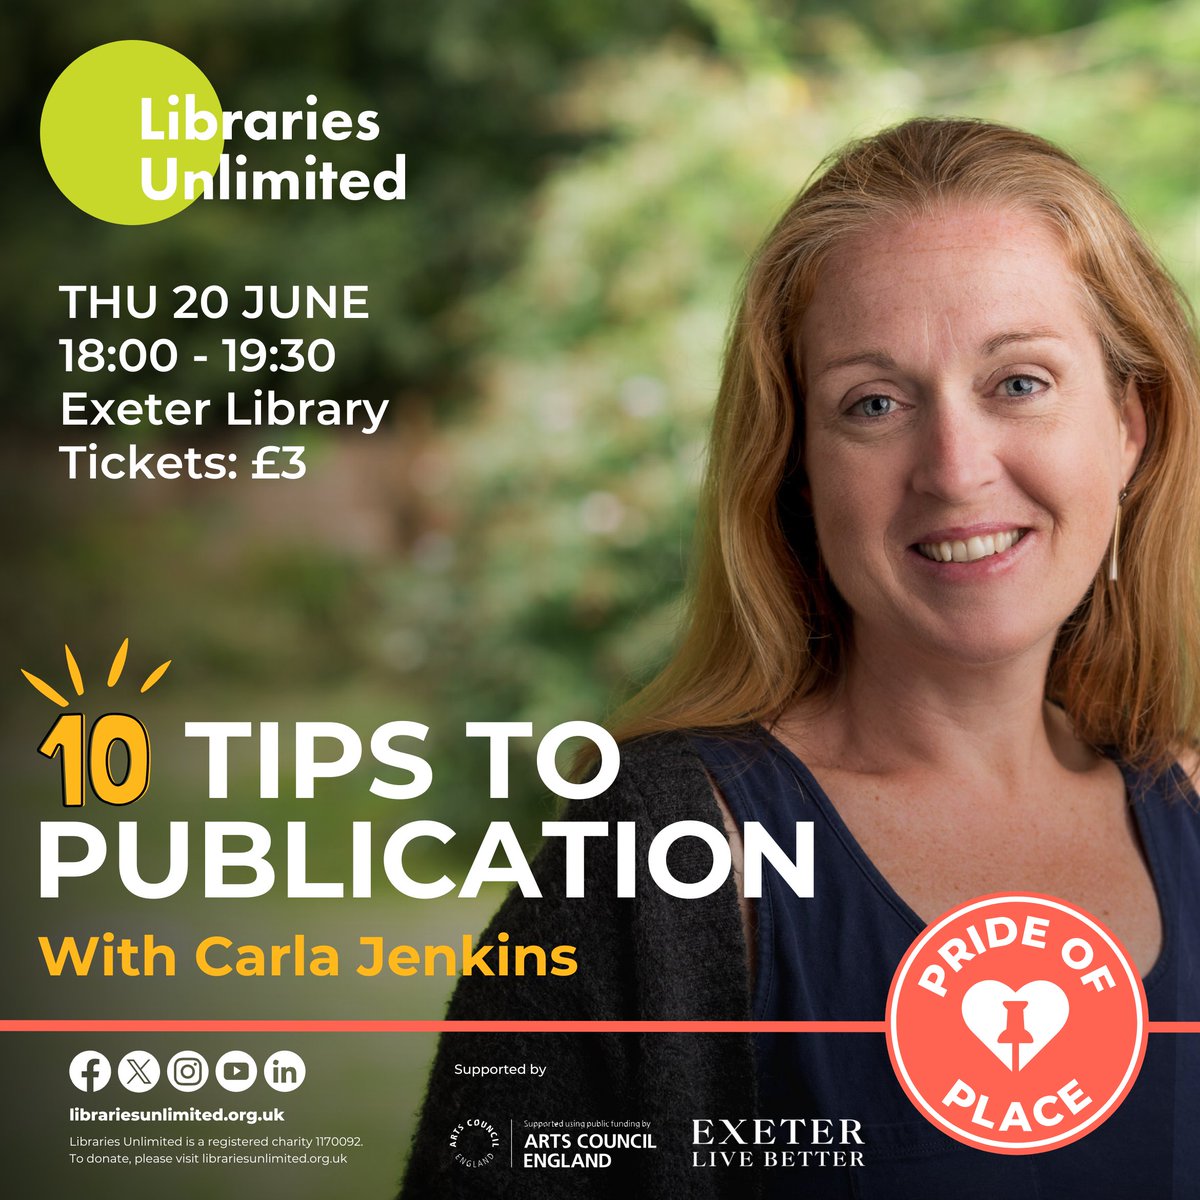 Calling all writers! Published author & workshop leader Carla Jenkins will be giving a talk at Exeter Library on 20 June covering the psychology of writing, imposter syndrome, work ethic, resilience + craft of writing, plus 10 top tips to publication. eventbrite.co.uk/e/10-tips-to-p…